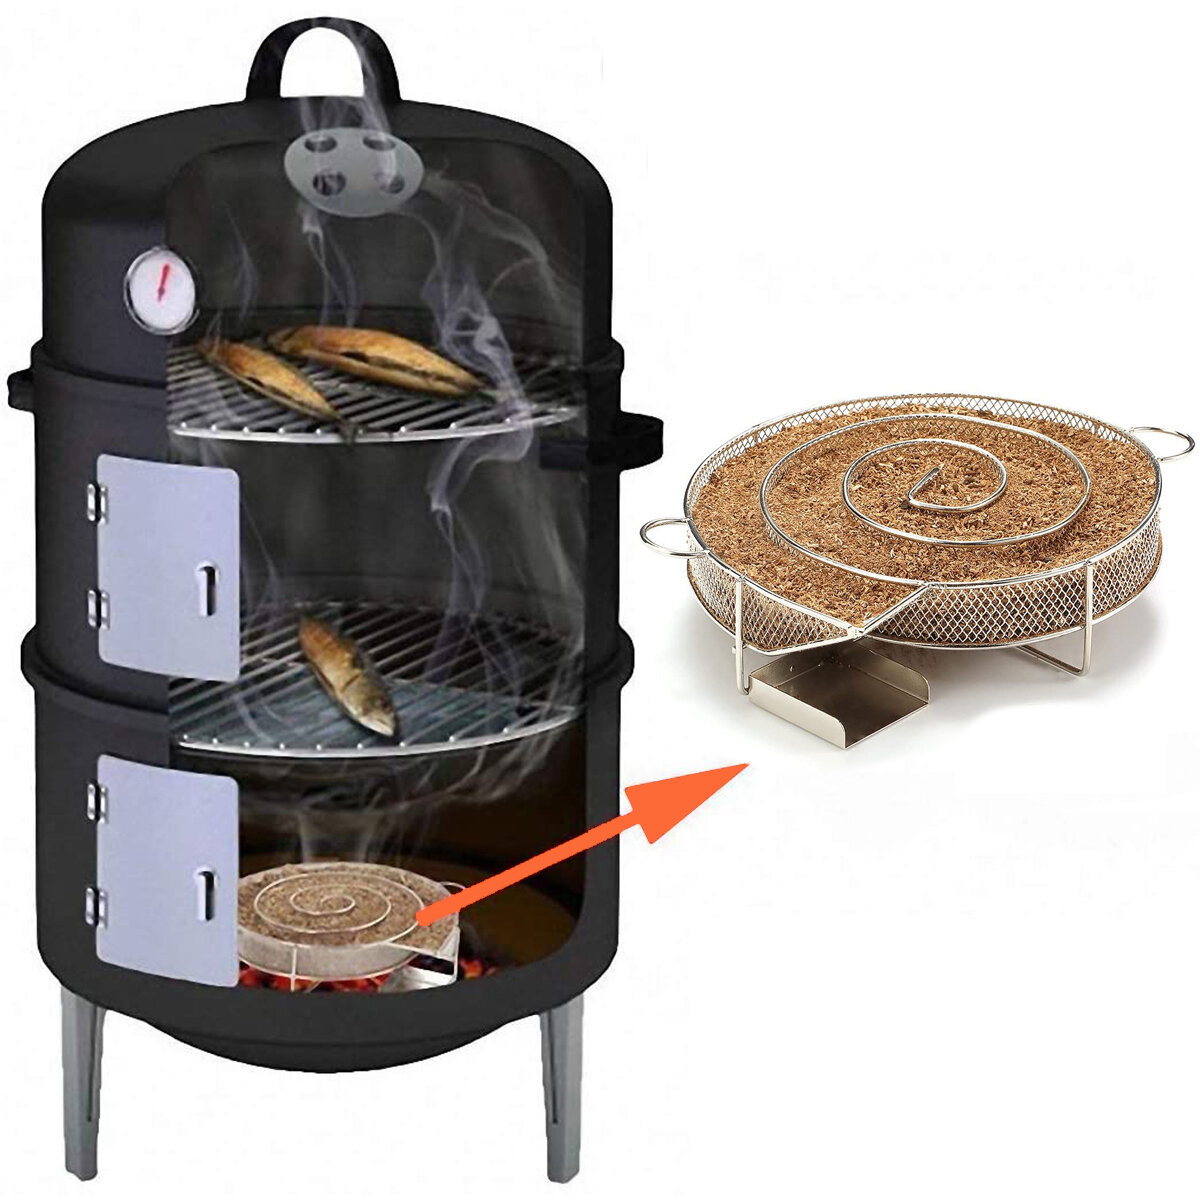 

Hot Cold Smoke Generator Round BBQ Grill Wood Chip Dust Cooking Sawdust Smoked Meat Camping Picnic